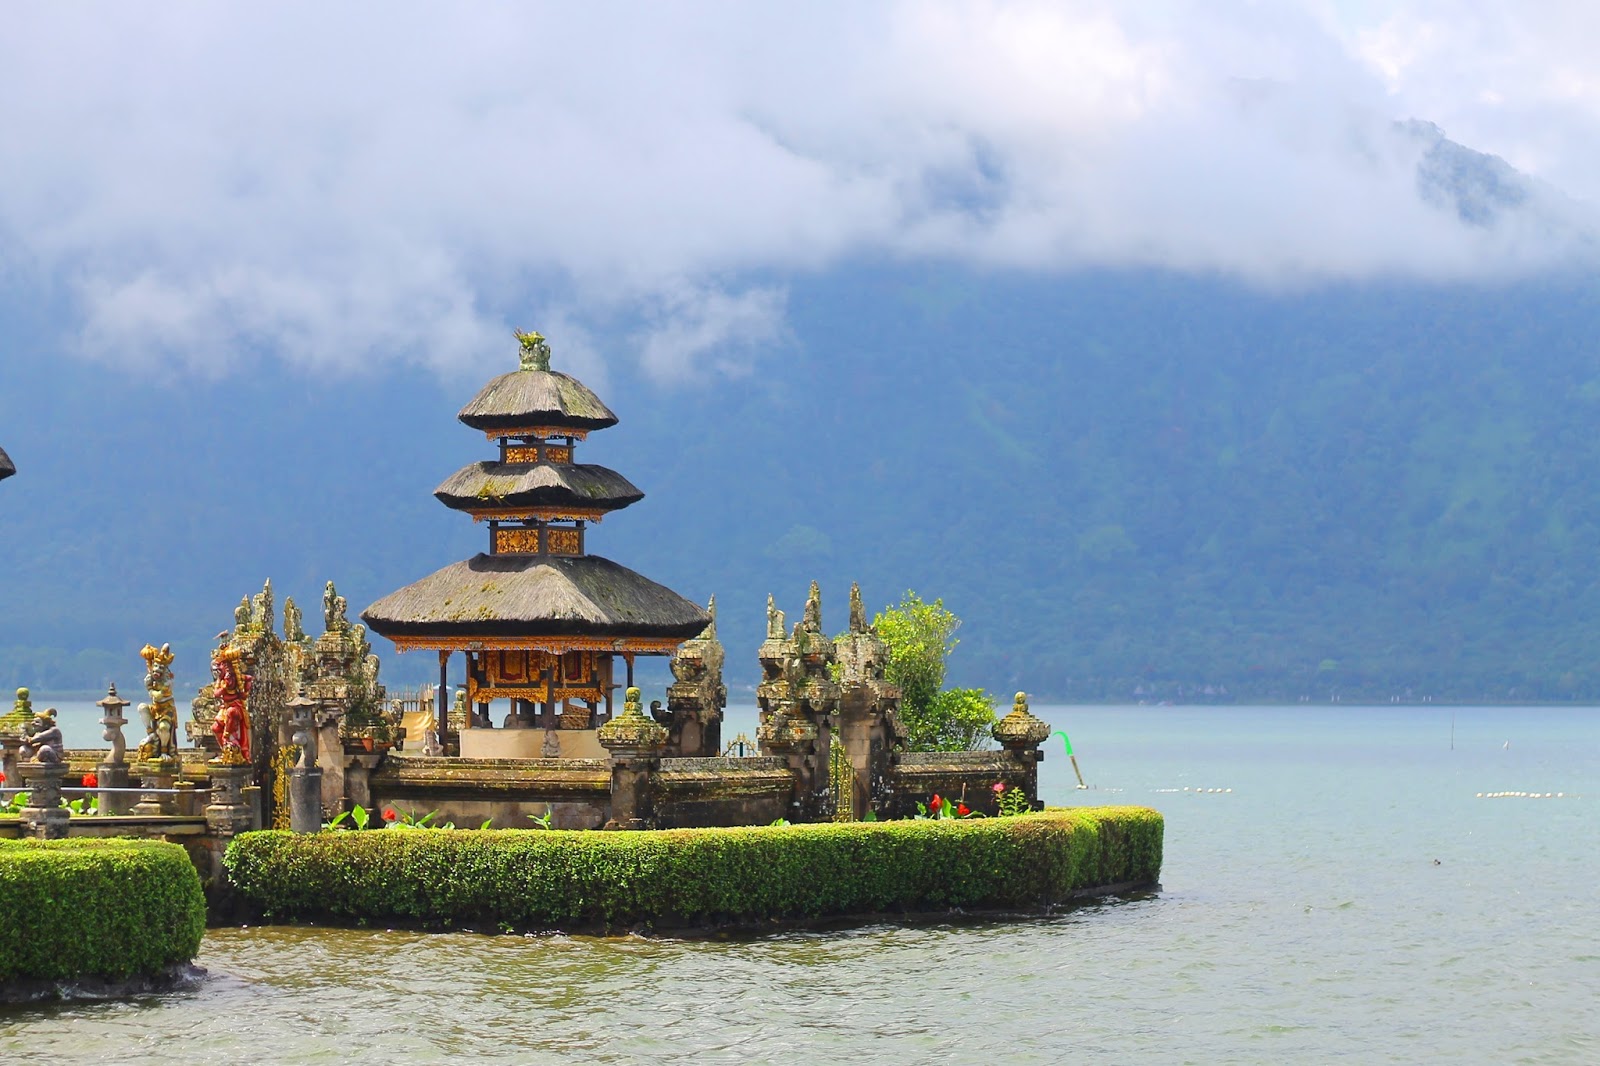 Temples of Bali